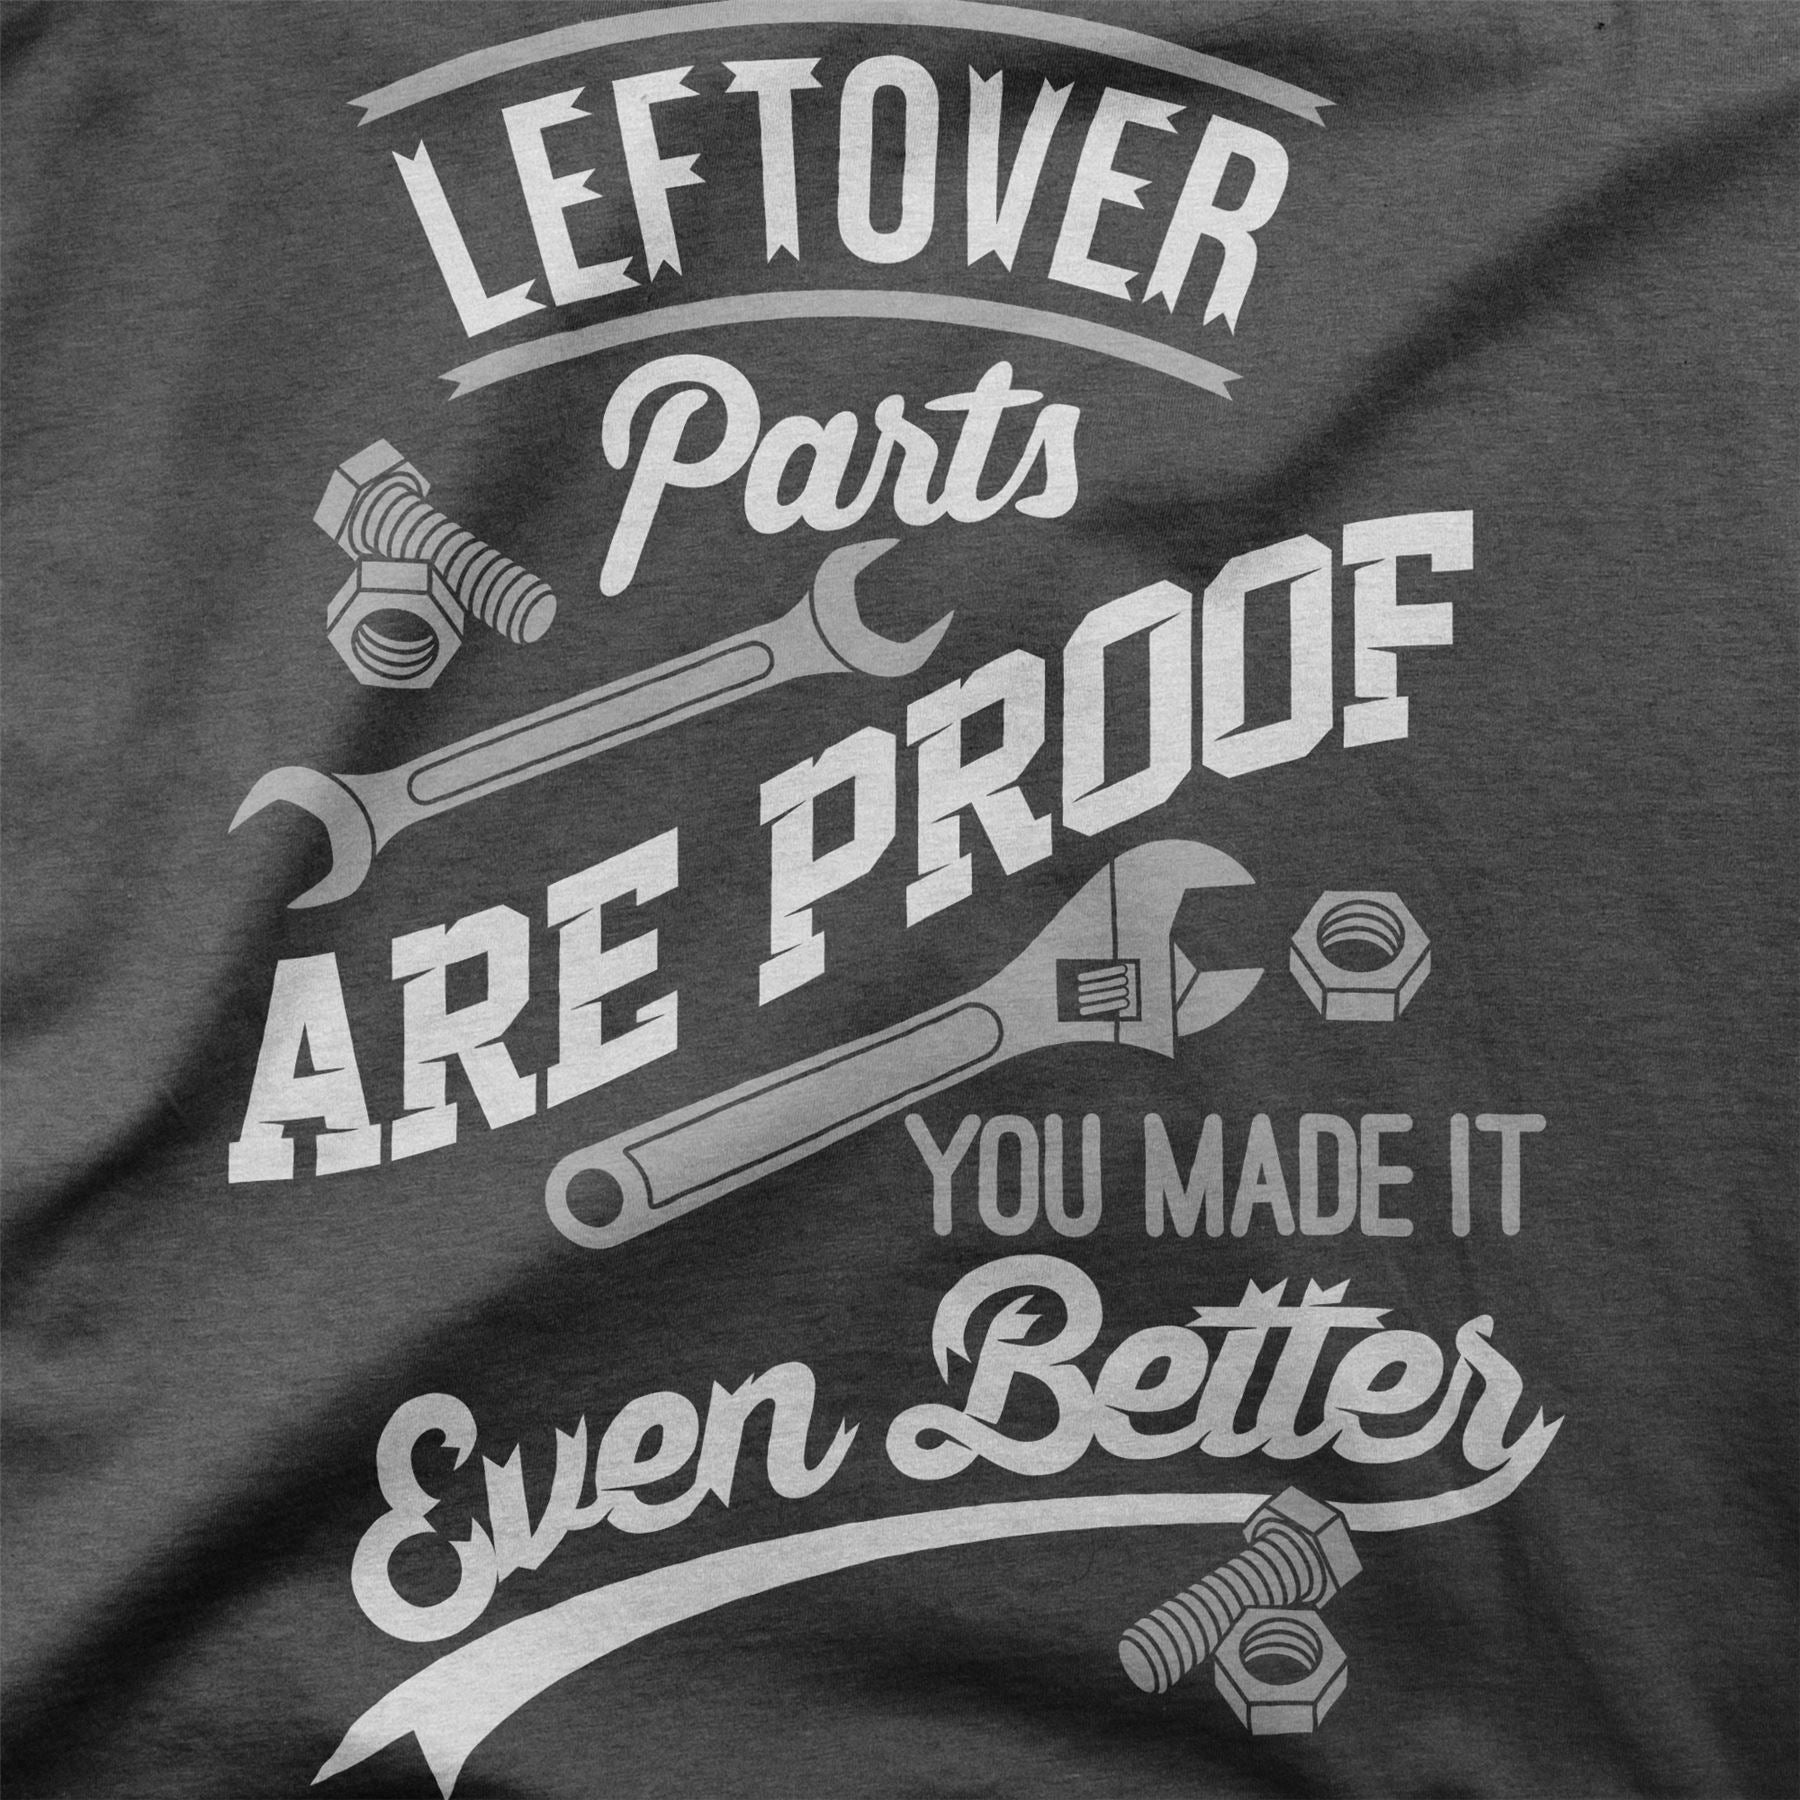 Leftover Parts Are Proof You Made It Even Better Organic Womens T-Shir